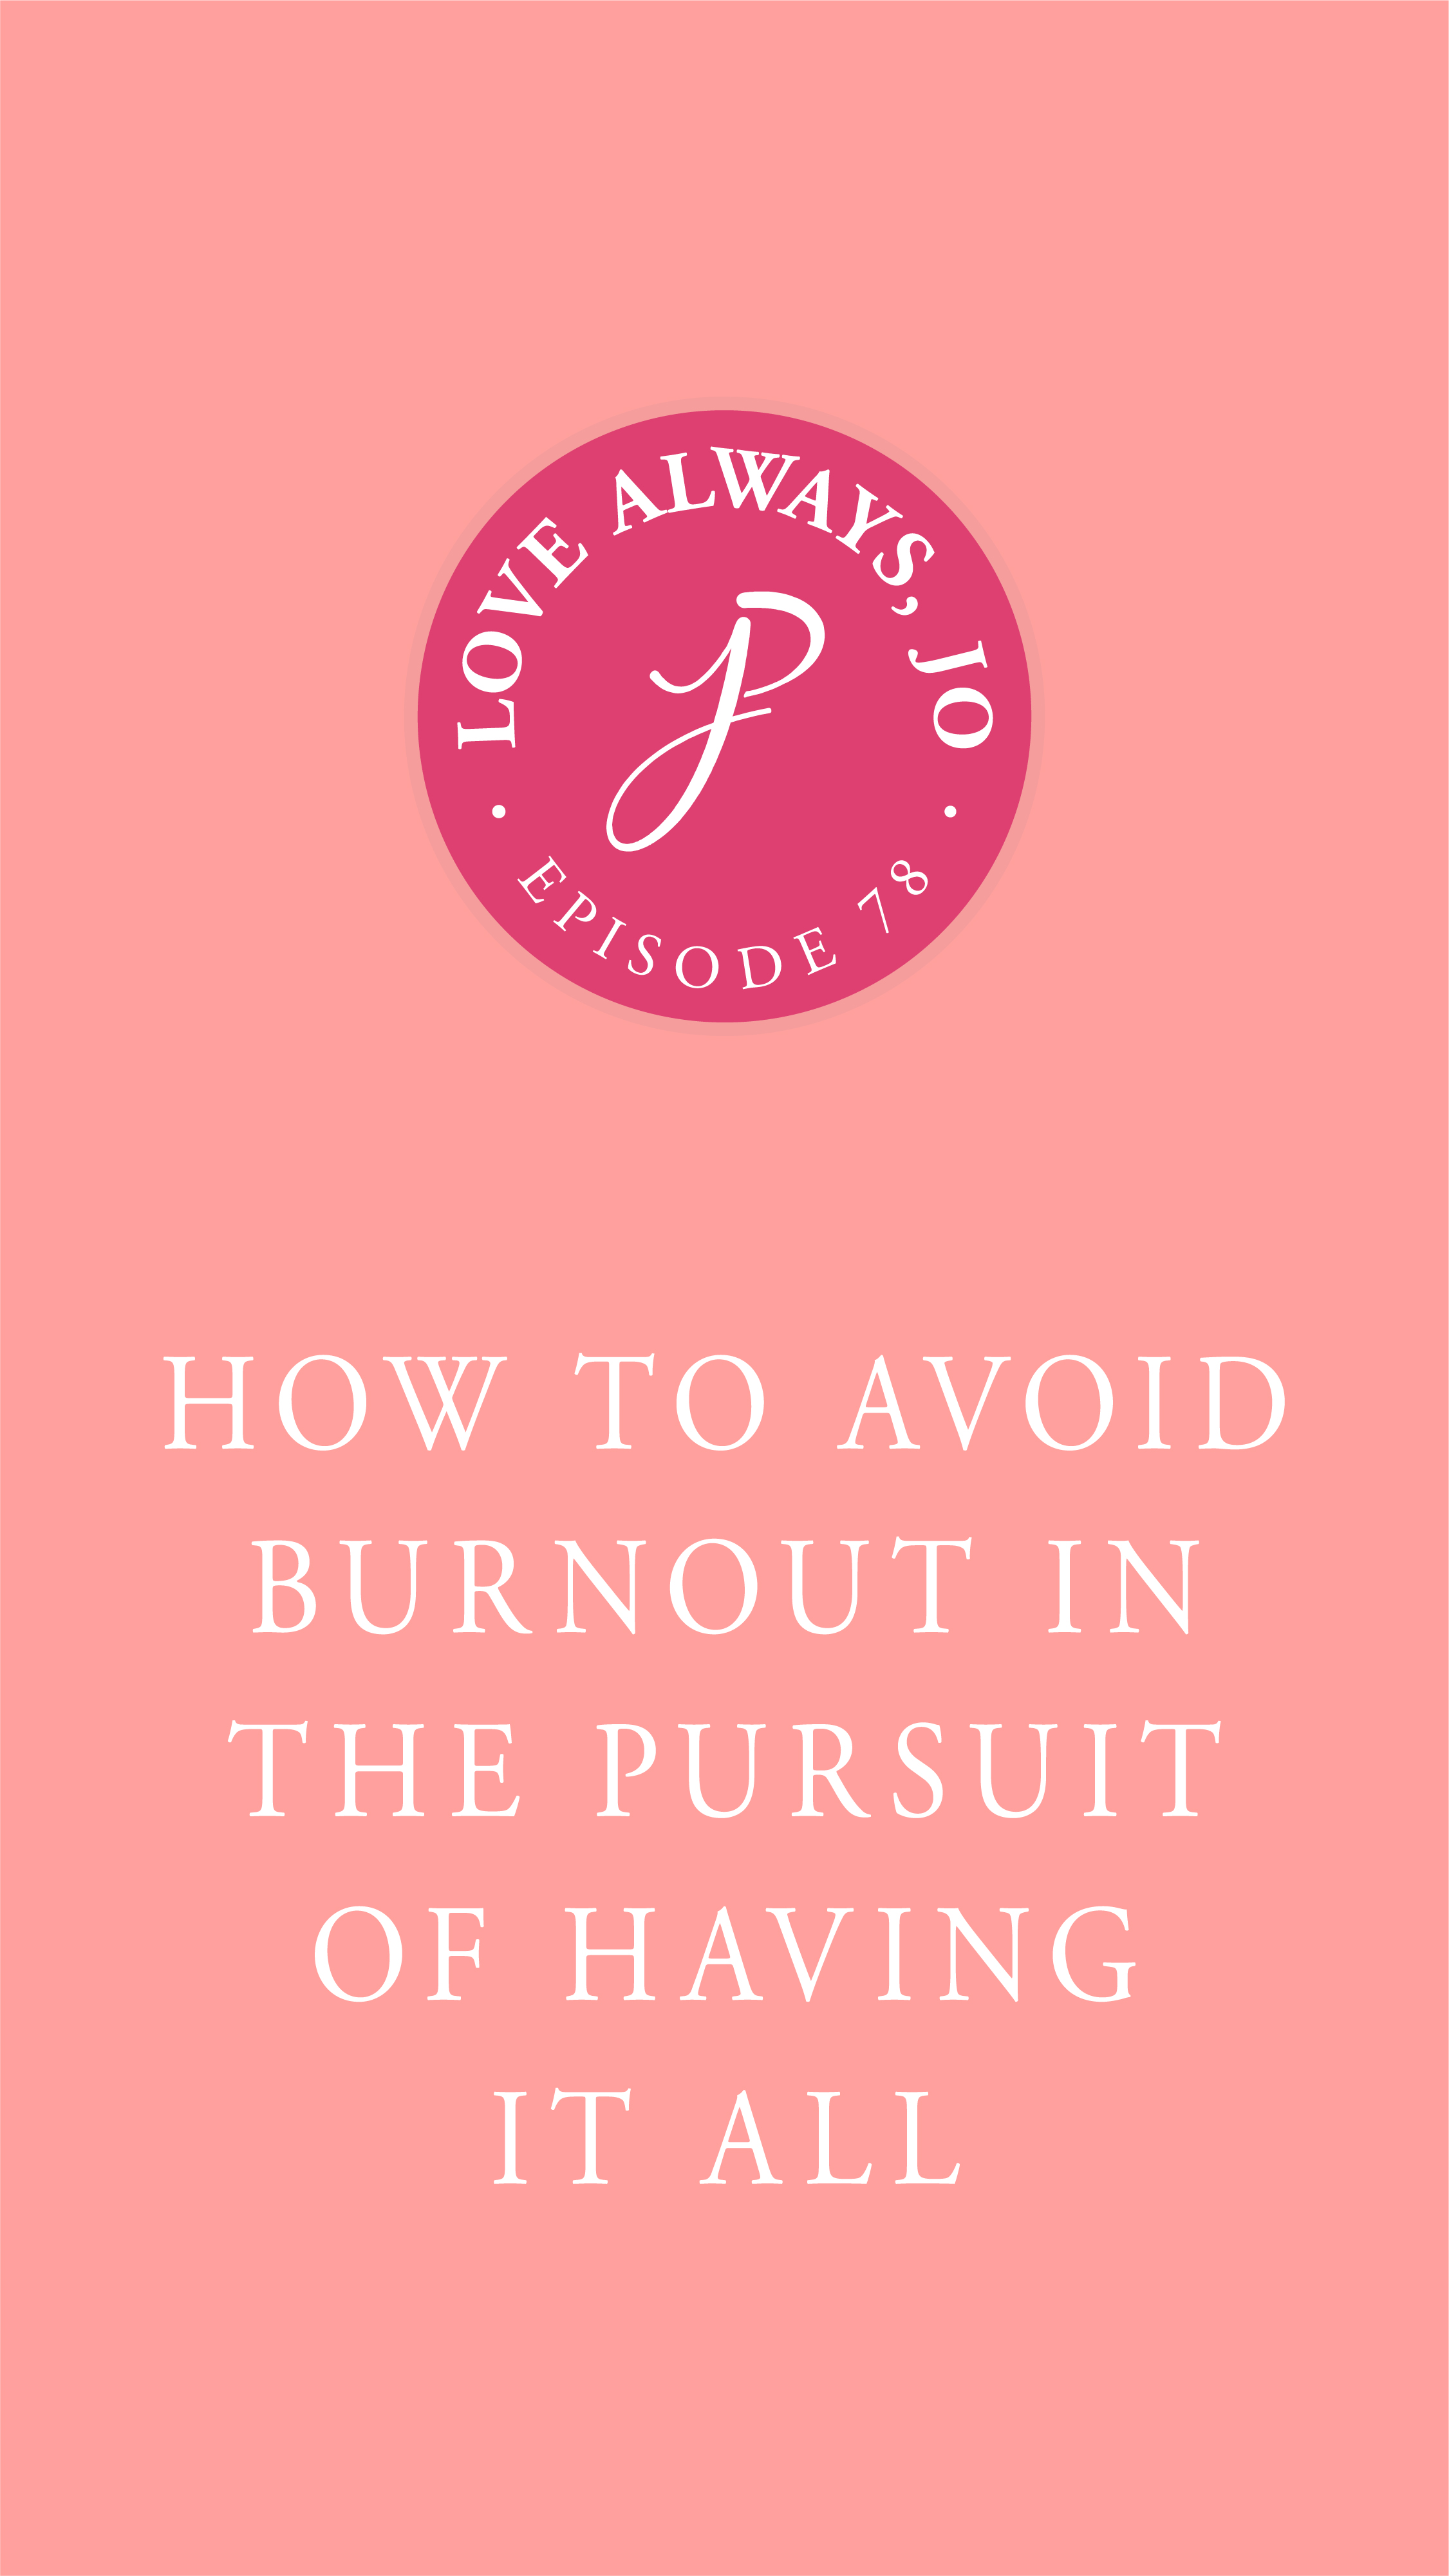 Love Always Jo Episode 78 How To Avoid Burnout in the Pursuit of Having it All